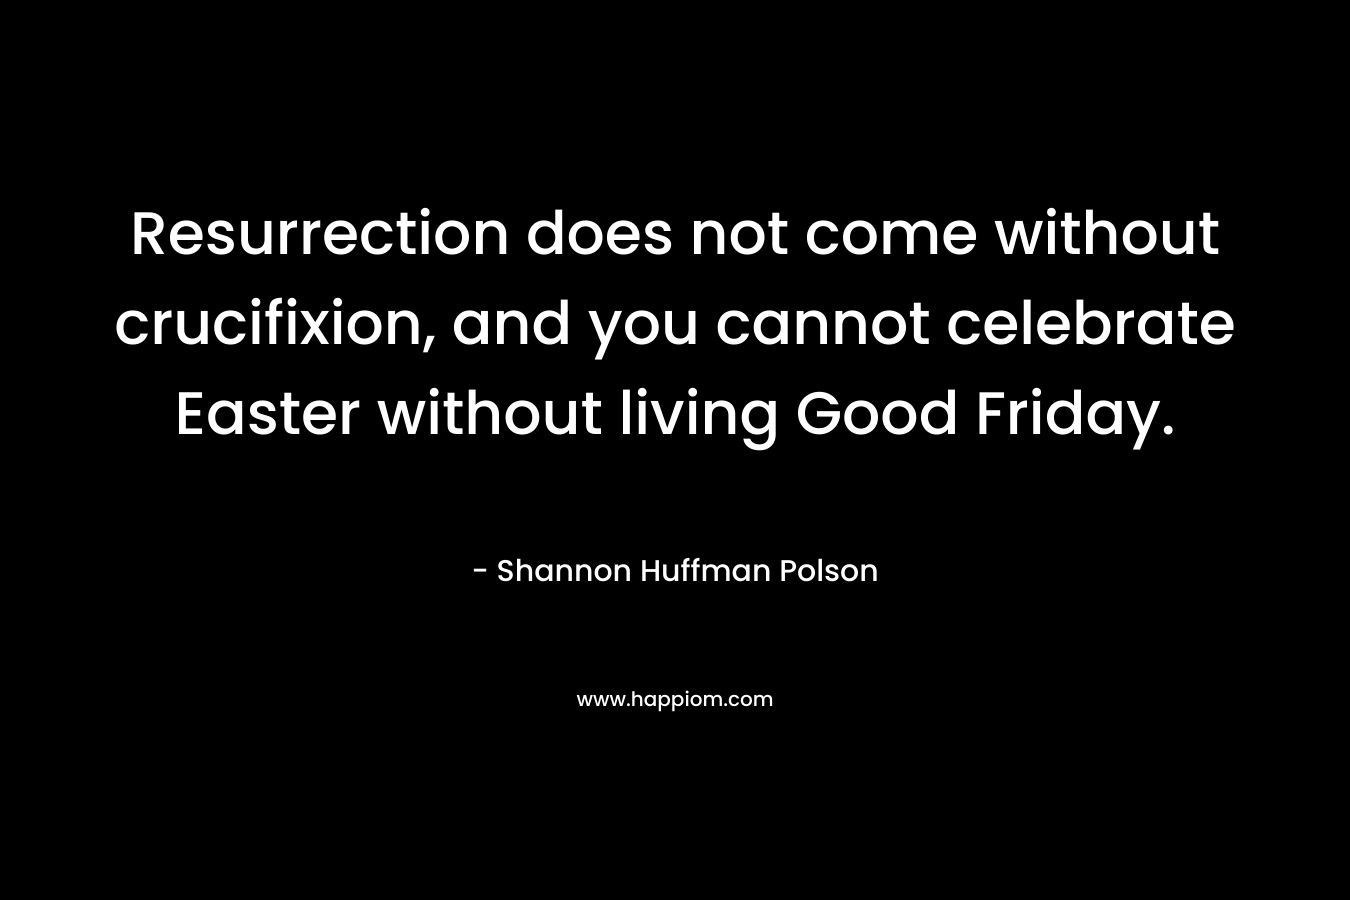 Resurrection does not come without crucifixion, and you cannot celebrate Easter without living Good Friday. – Shannon Huffman Polson